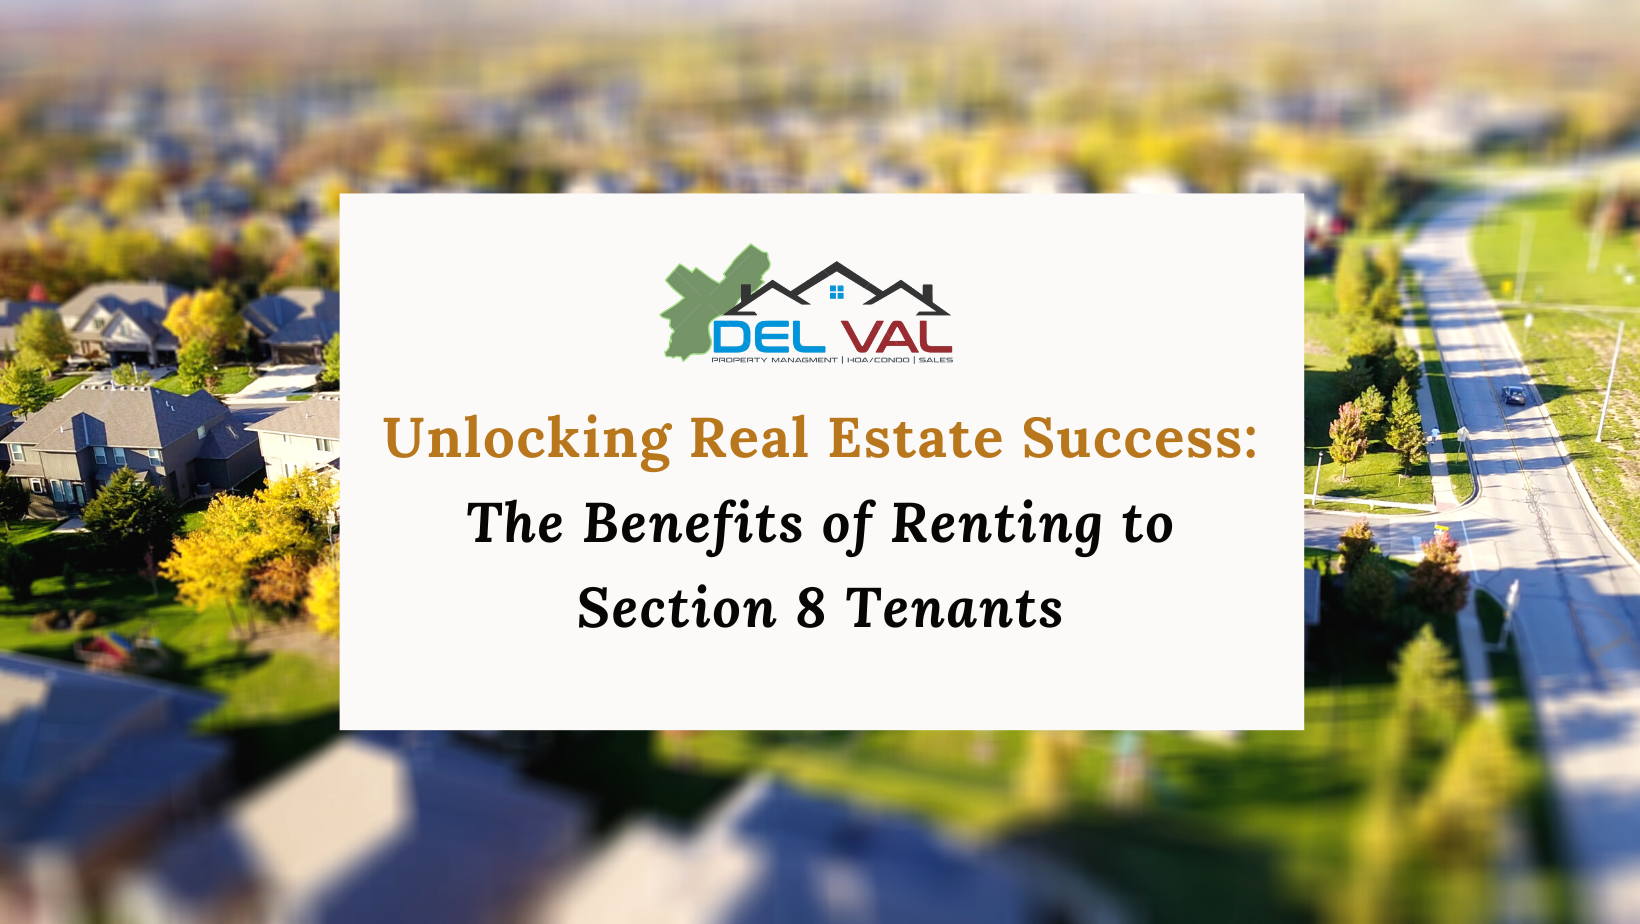 Unlocking Real Estate Success: The Benefits of Renting to Section 8 Tenants